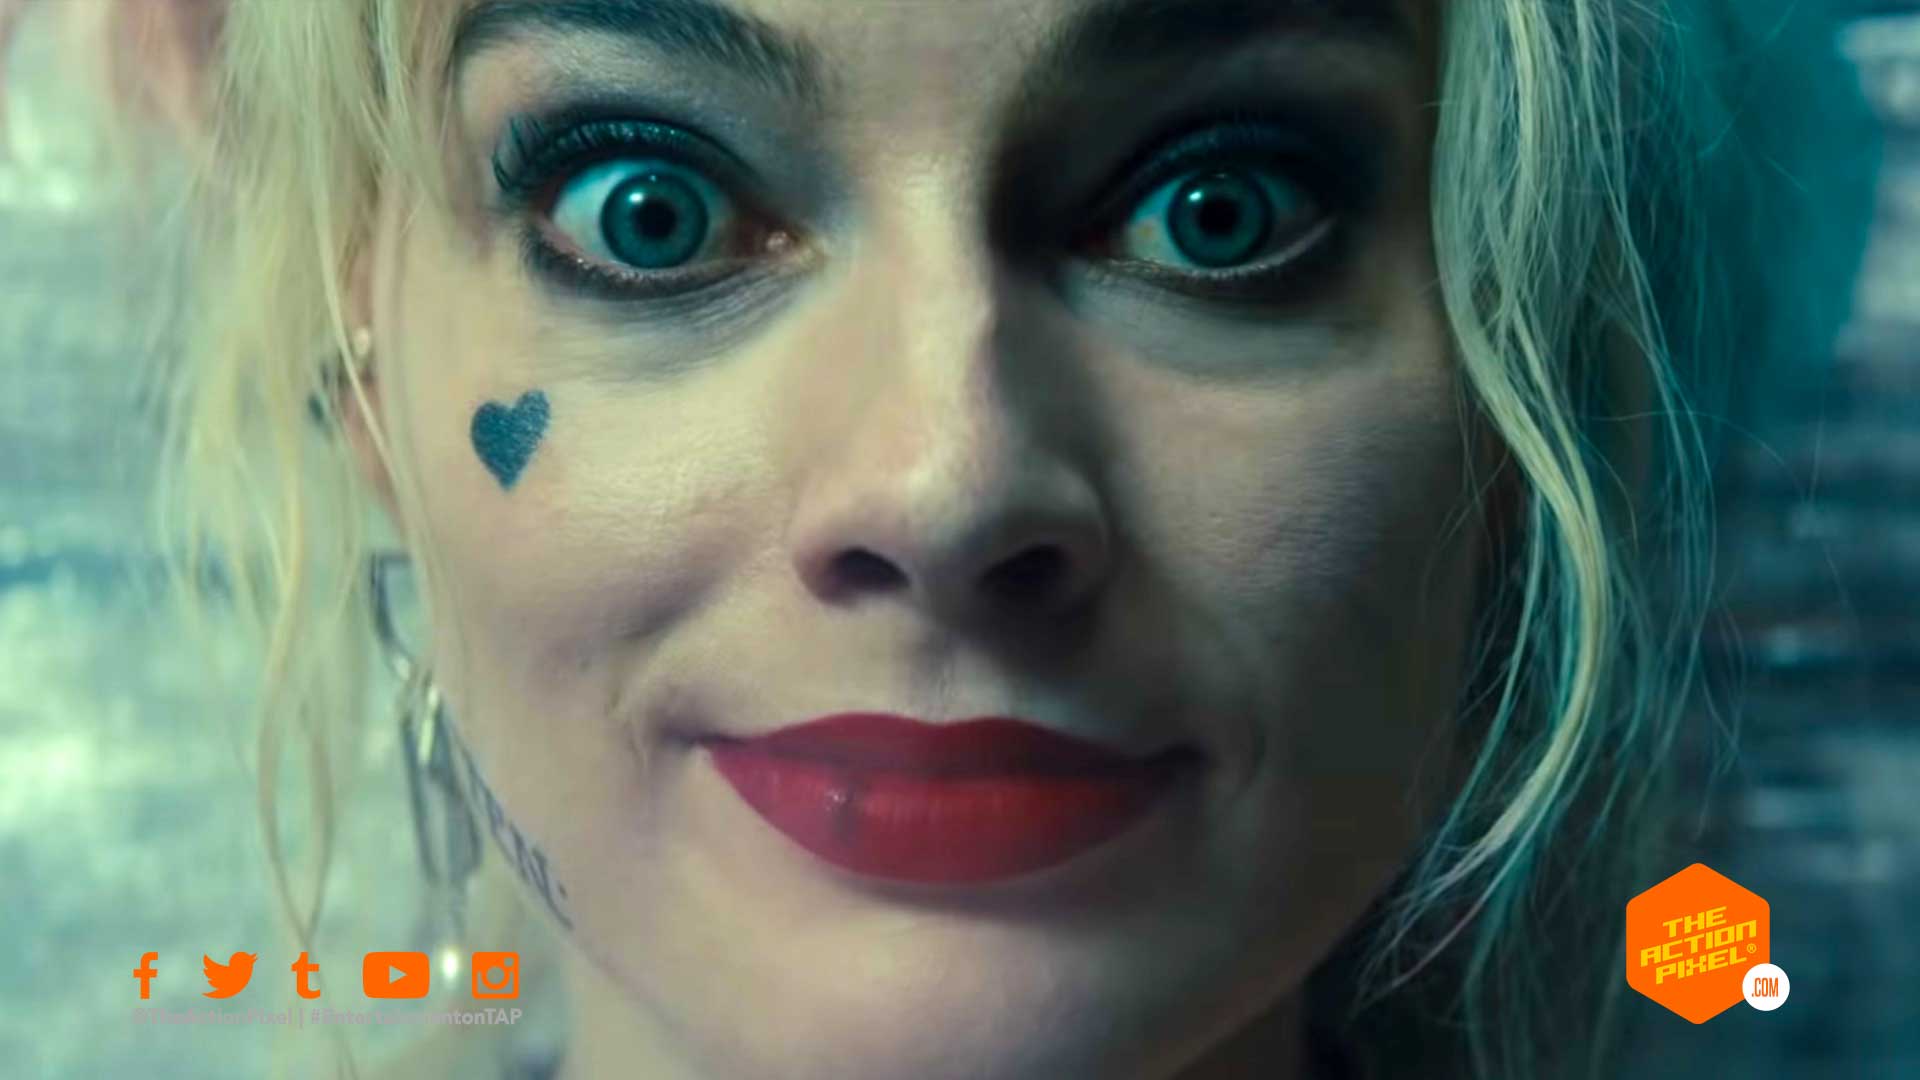 harley quinn, bop, birds of prey poster, birds of prey, birds of prey movie, dc comics, wb pictures, warner bros pictures, harley quinn, margot robbie, the action pixel, entertainment on tap, featured,trailer, margot robbie harley quinn,birds of prey trailer 2,